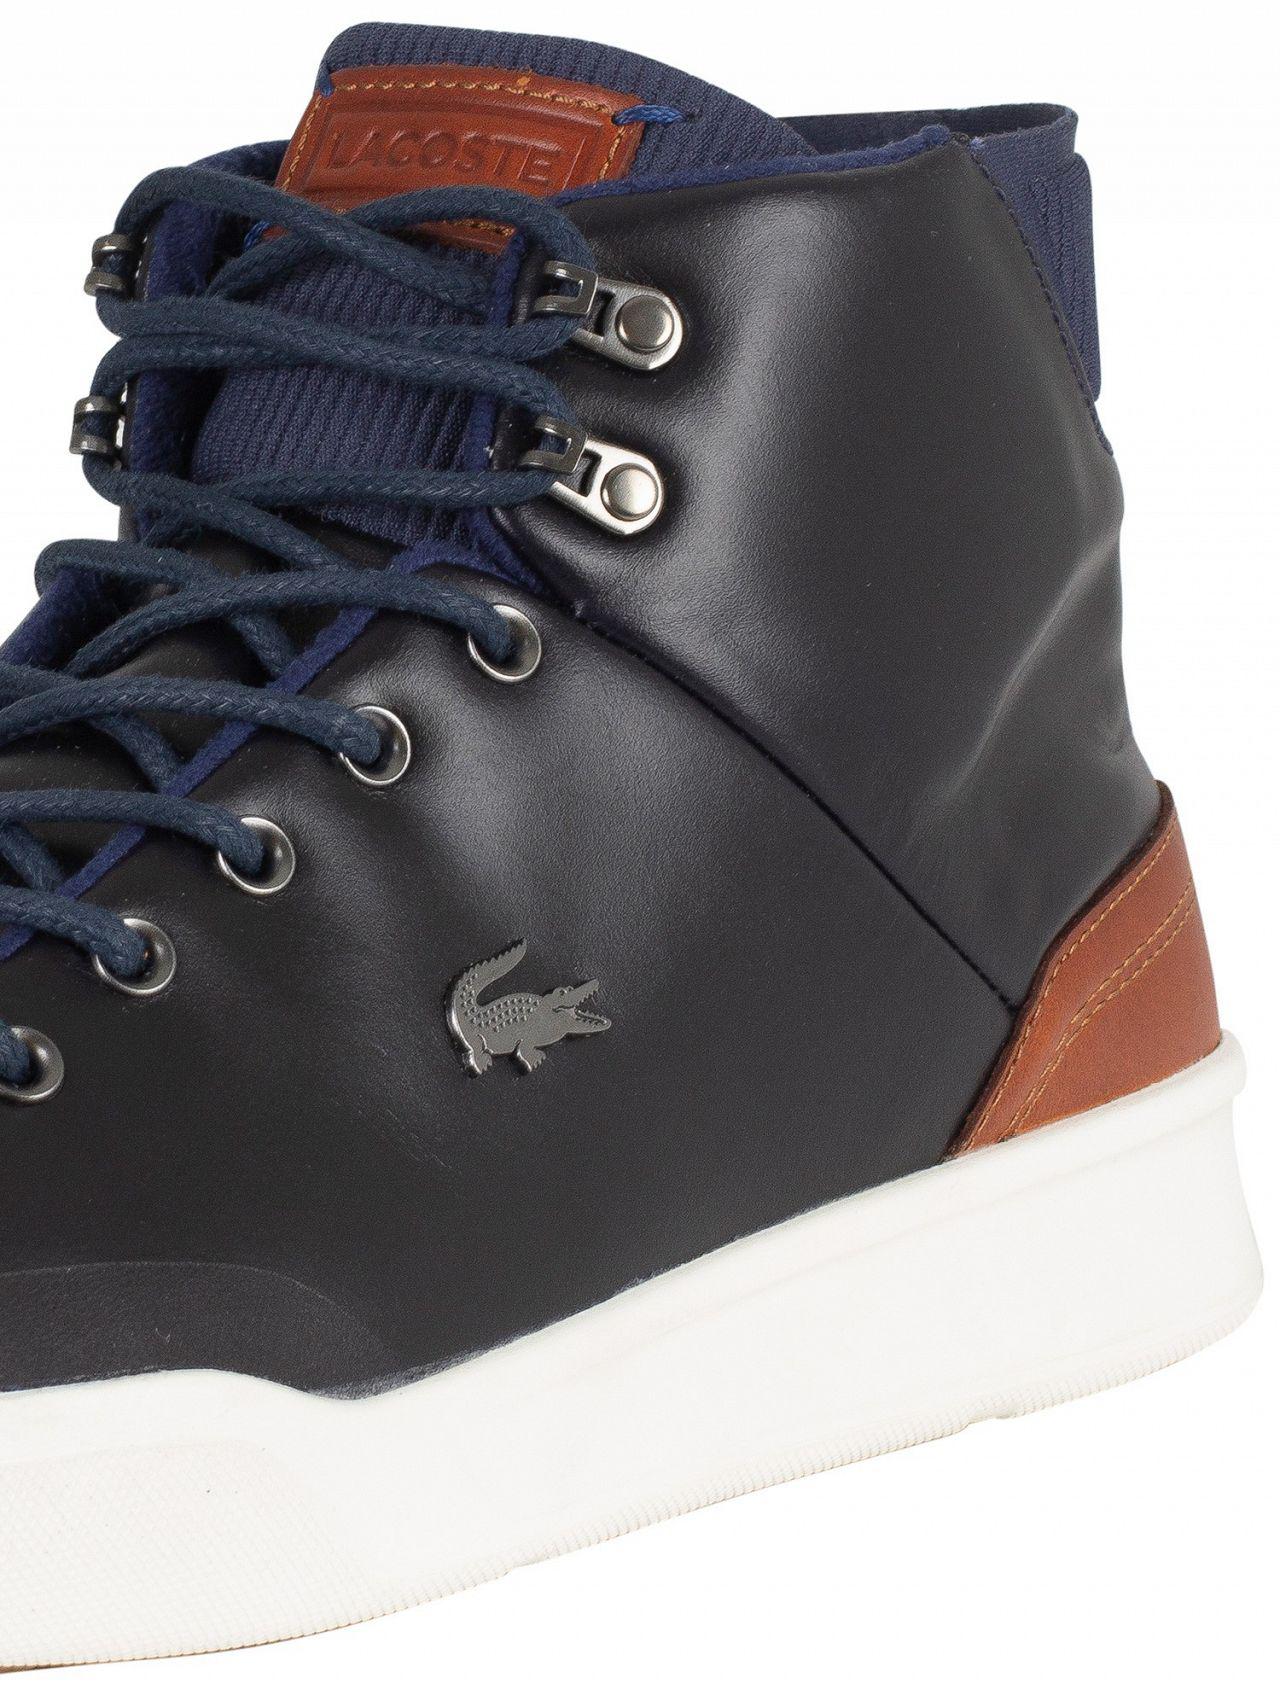 Lacoste Leather Explorateur Classic 318 1 Cam Trainers in Navy (Blue) for  Men - Lyst